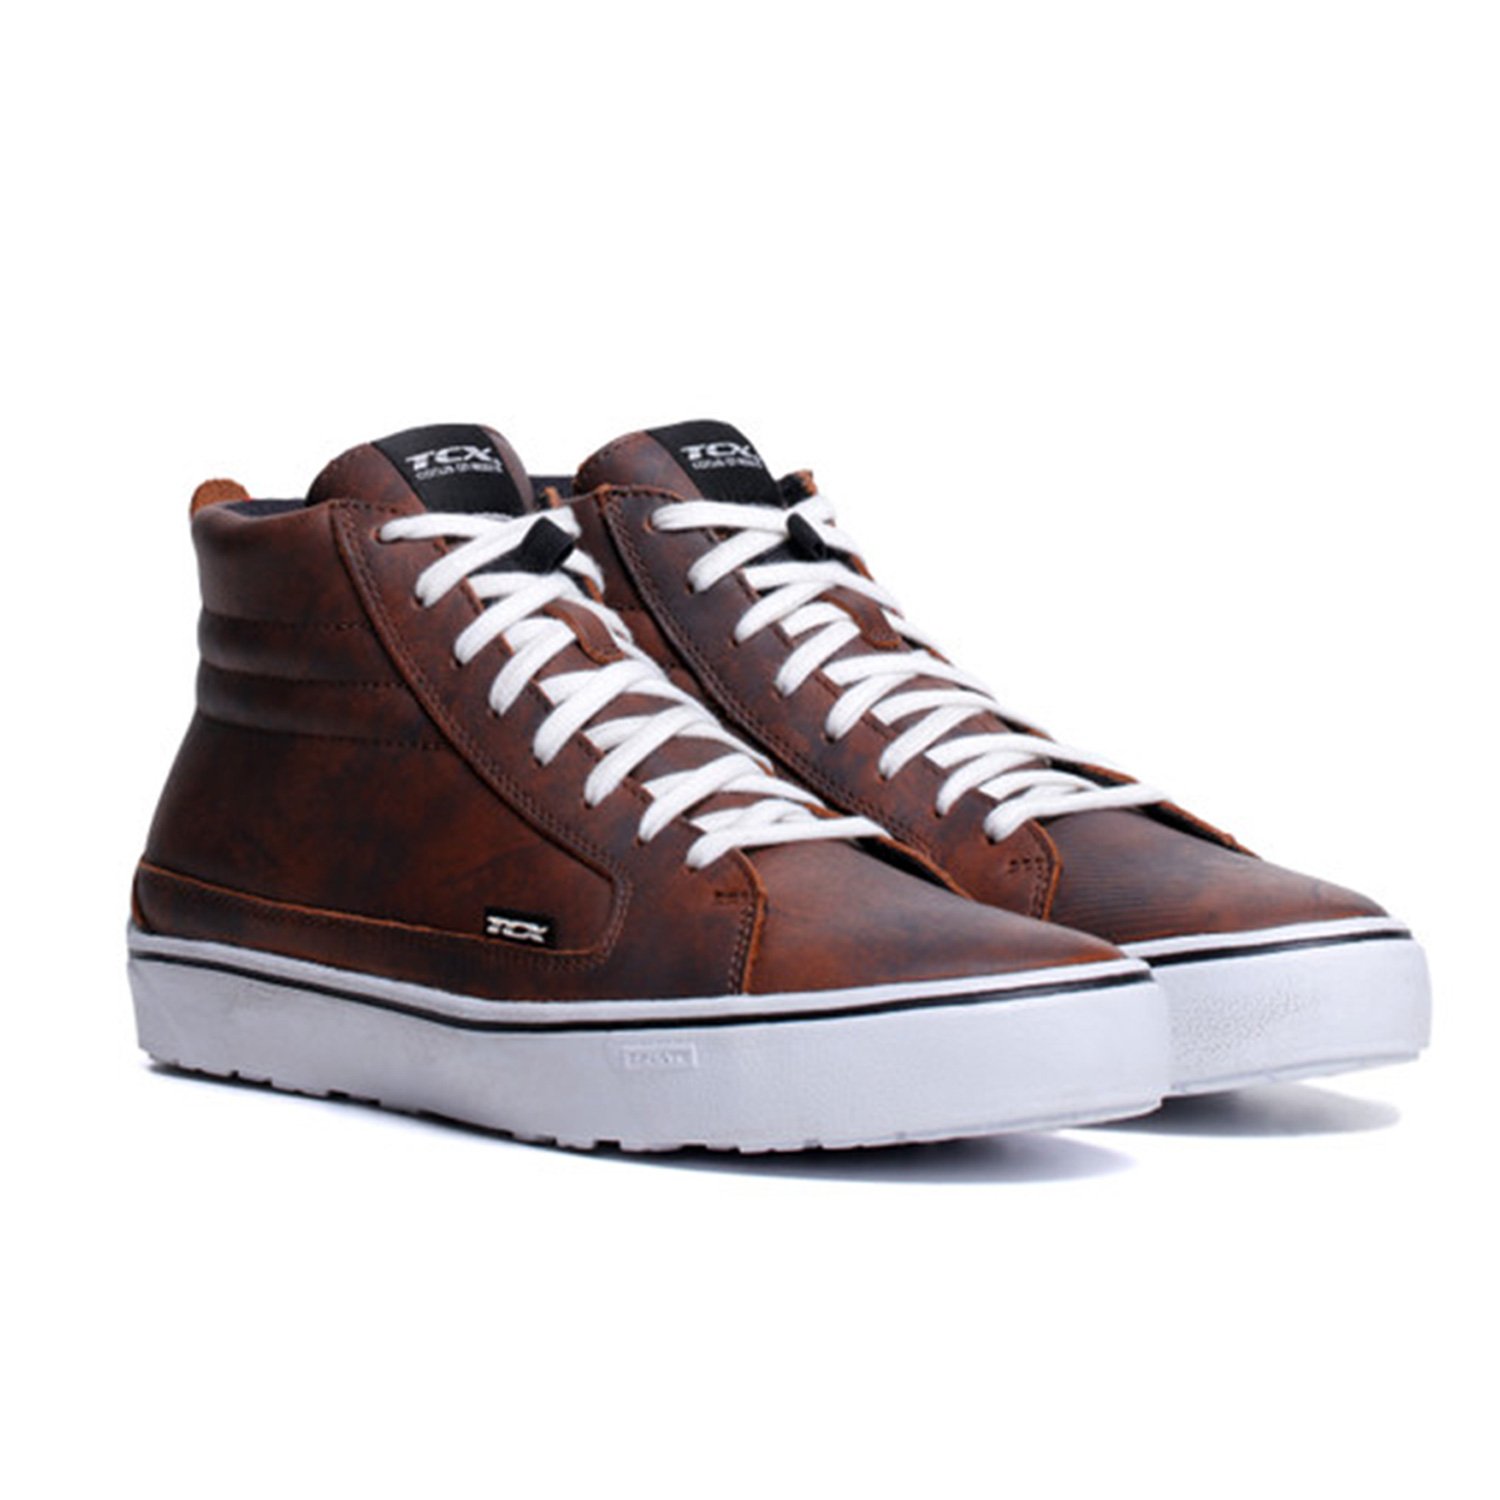 Image of TCX Street 3 WP Marron Blanc Chaussures Taille 47